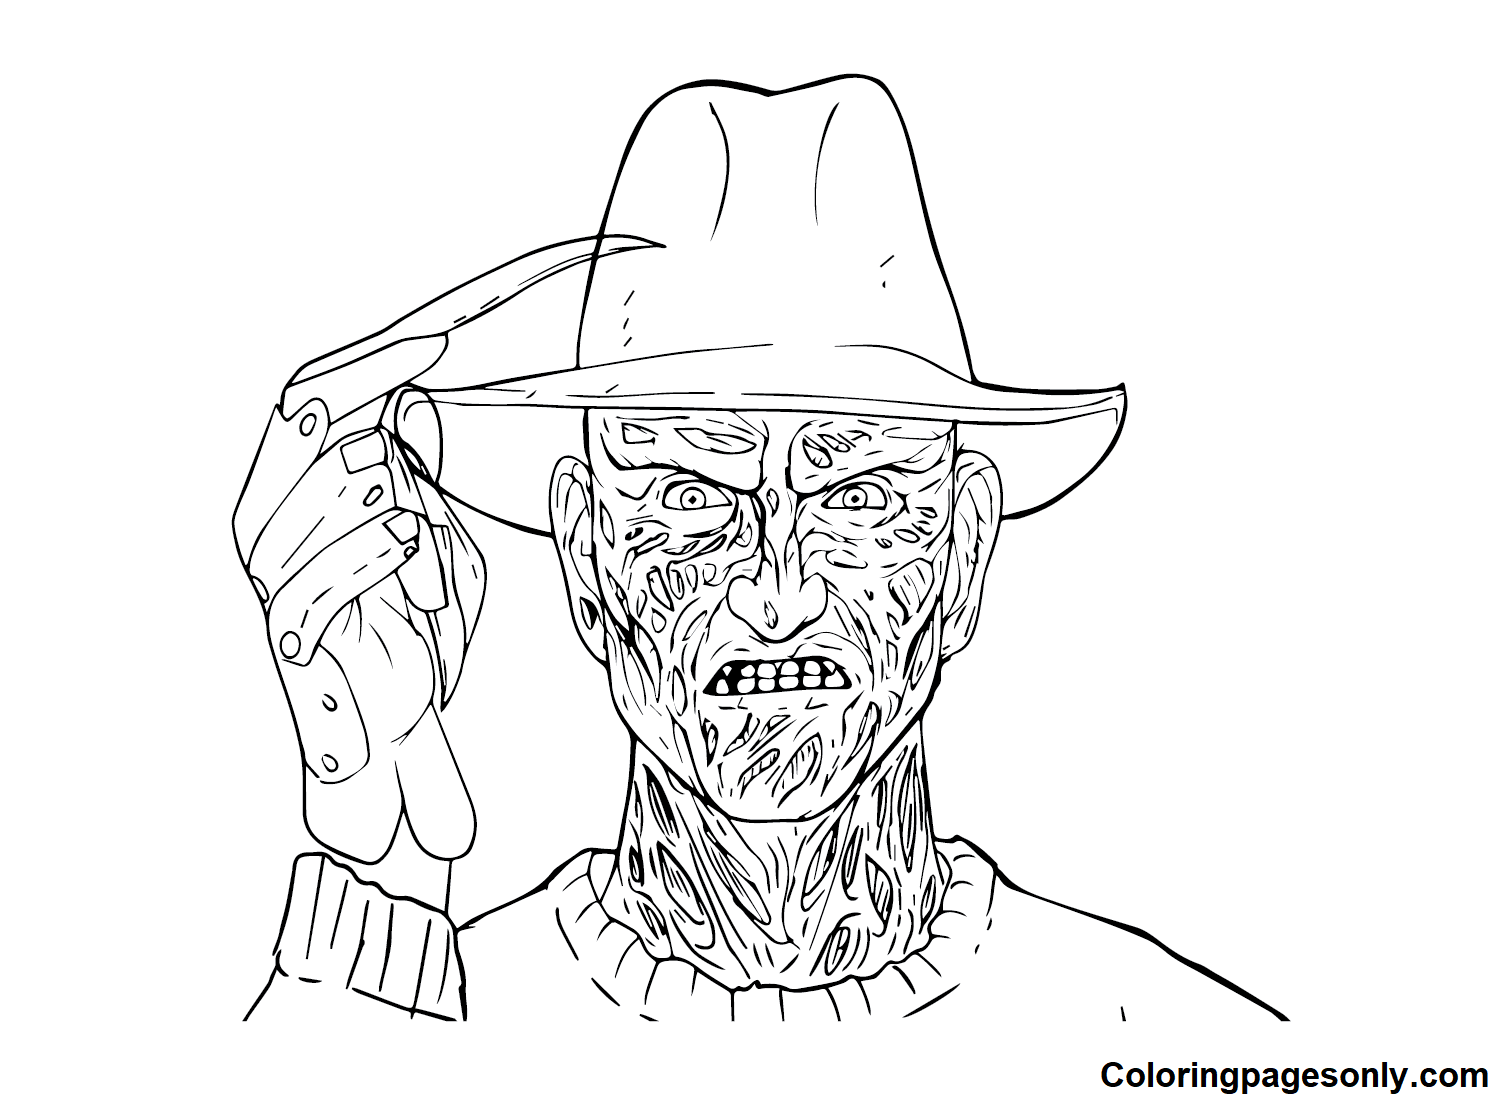 Free Freddy Krueger Printable Coloring Pages